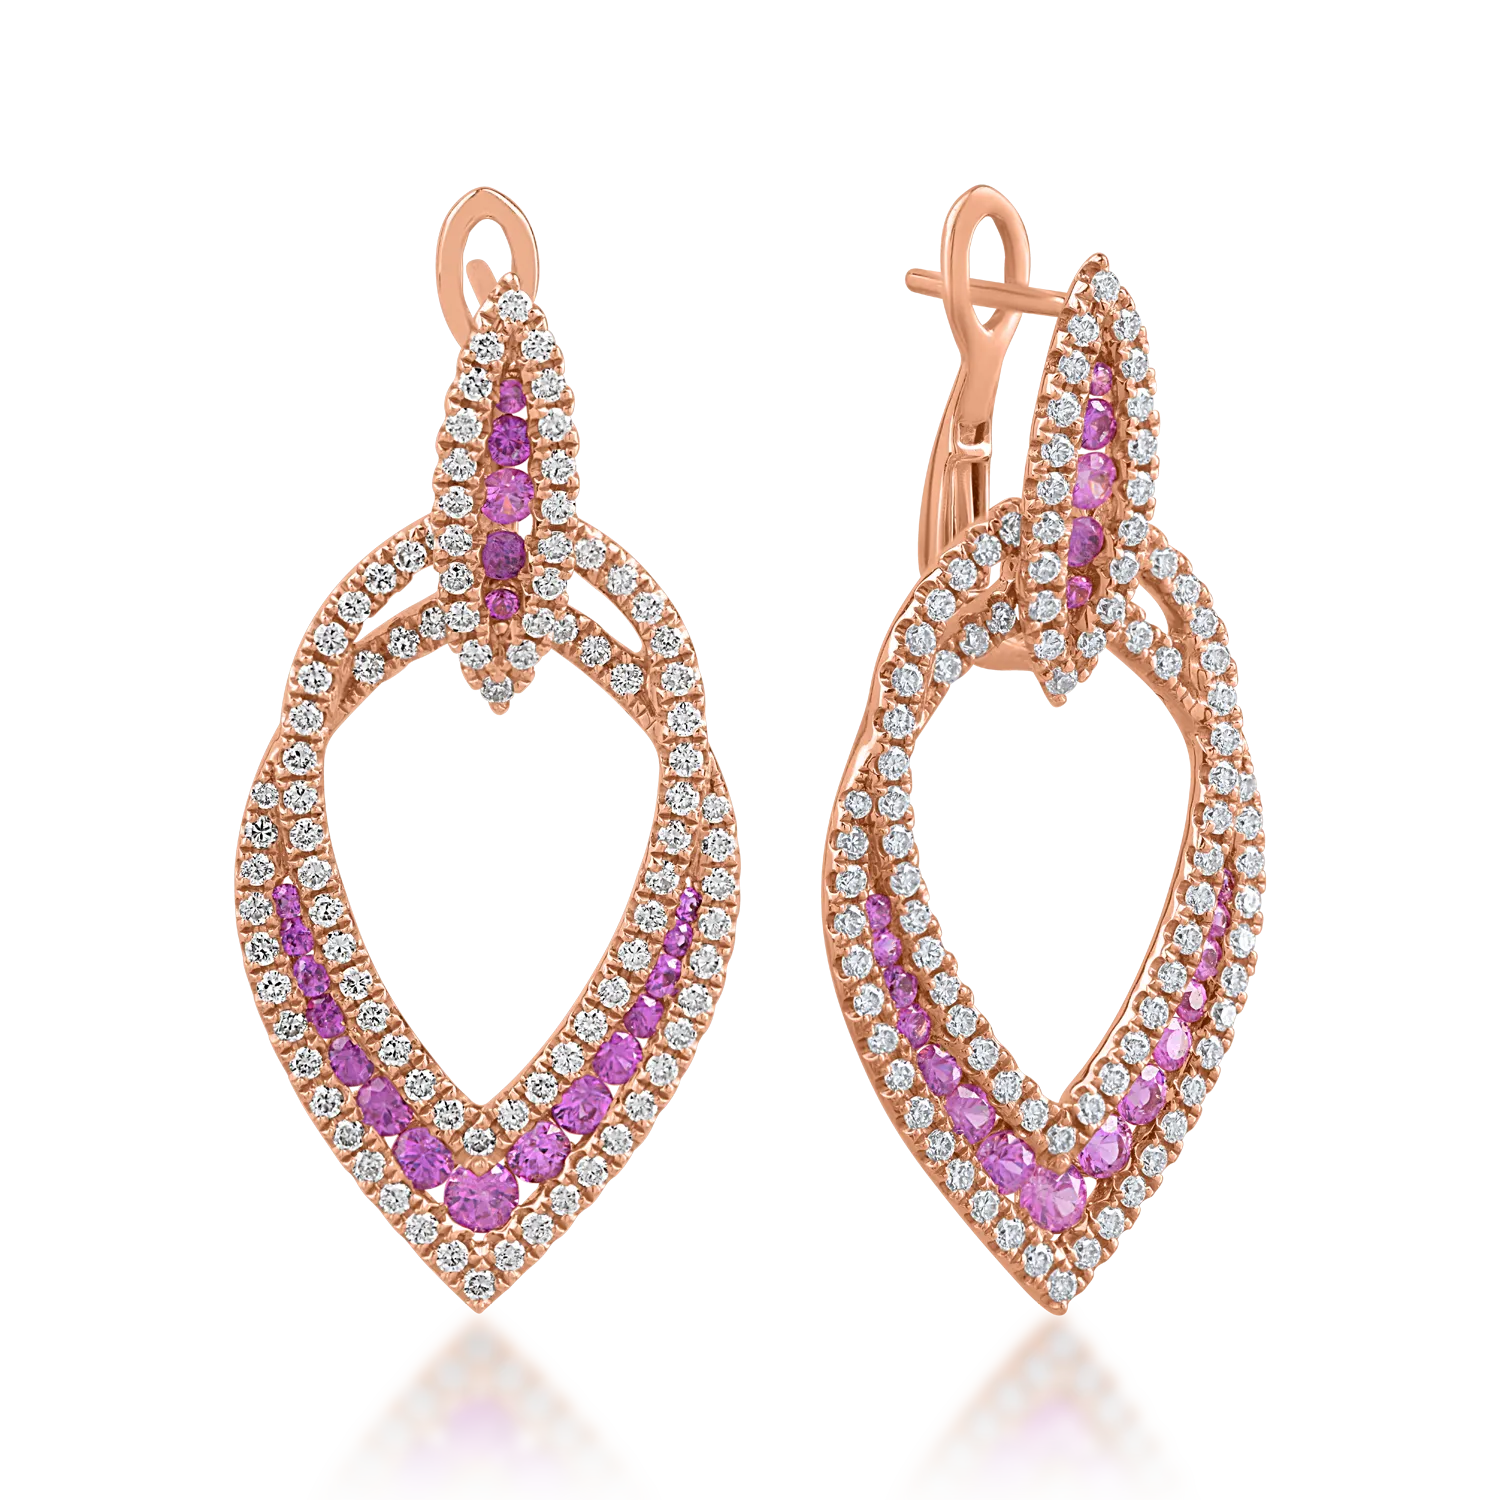 Rose gold earrings with 1.14ct diamonds and 1.09ct pink sapphires